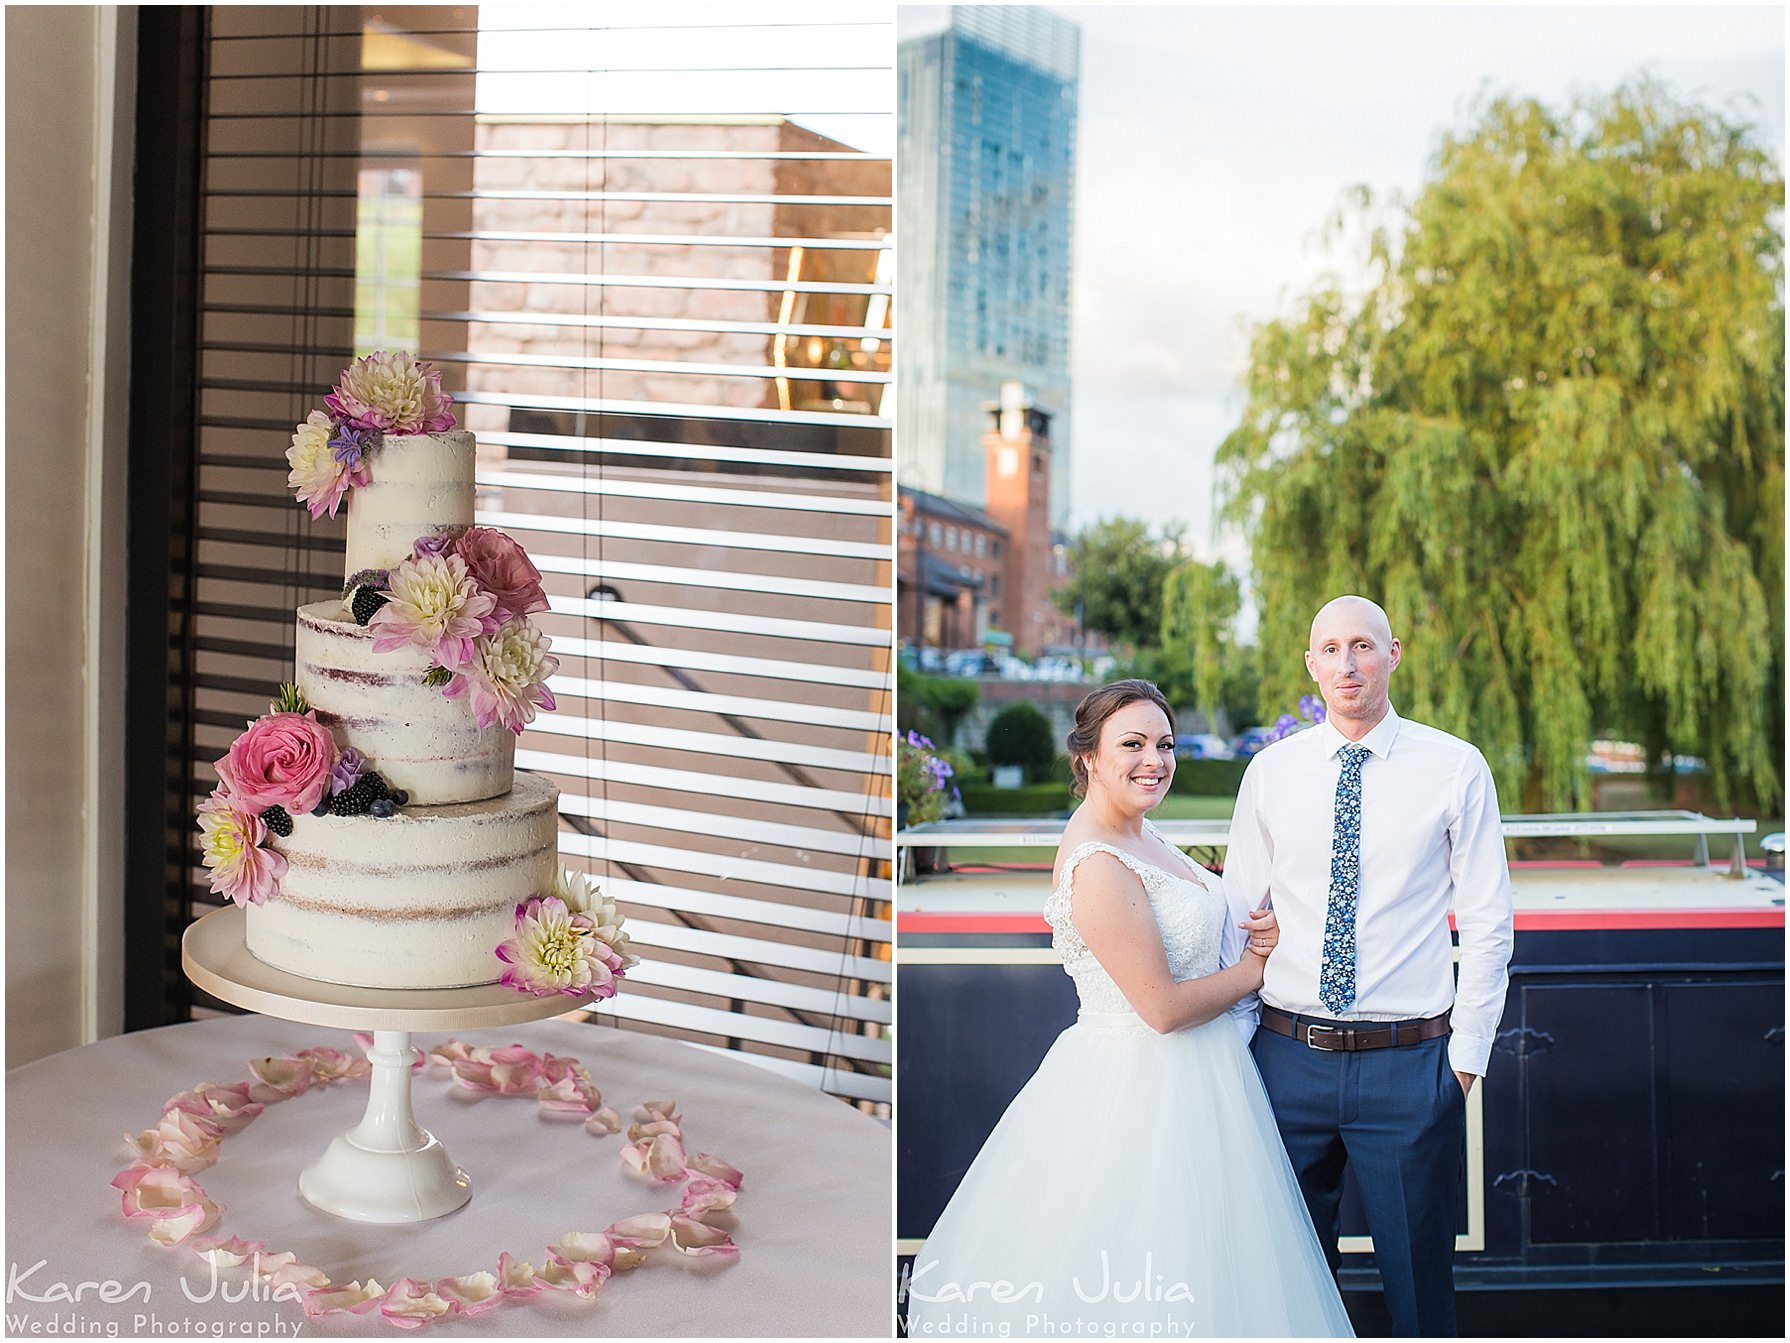 photos showing wedding cake in the Brindley Room, Castlefield Rooms and a couple portrait